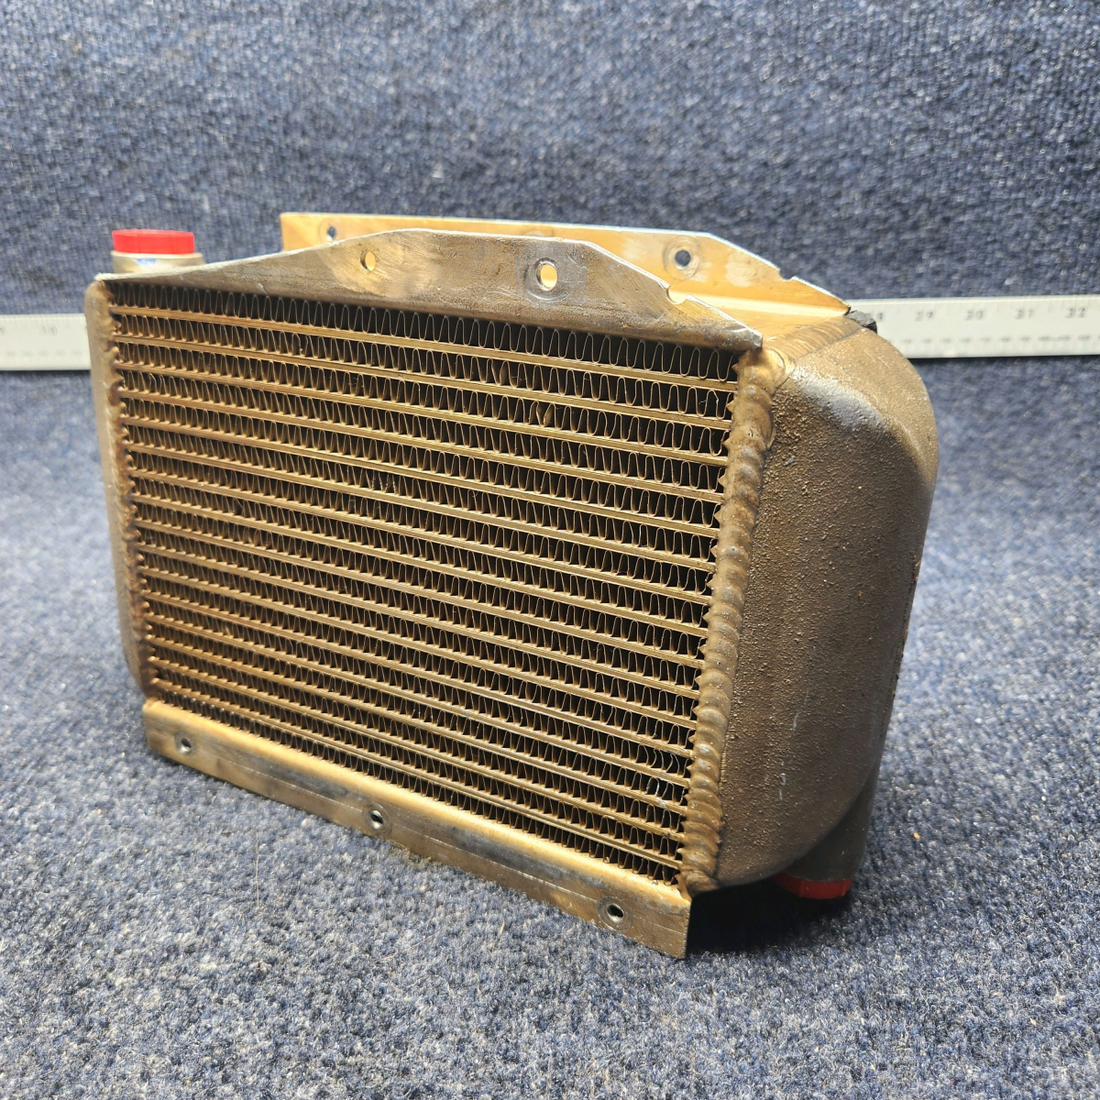 Used aircraft parts for sale, 8541336 Lycoming Textron OIL COOLER ASSEMBLY "SEE PHOTOS"